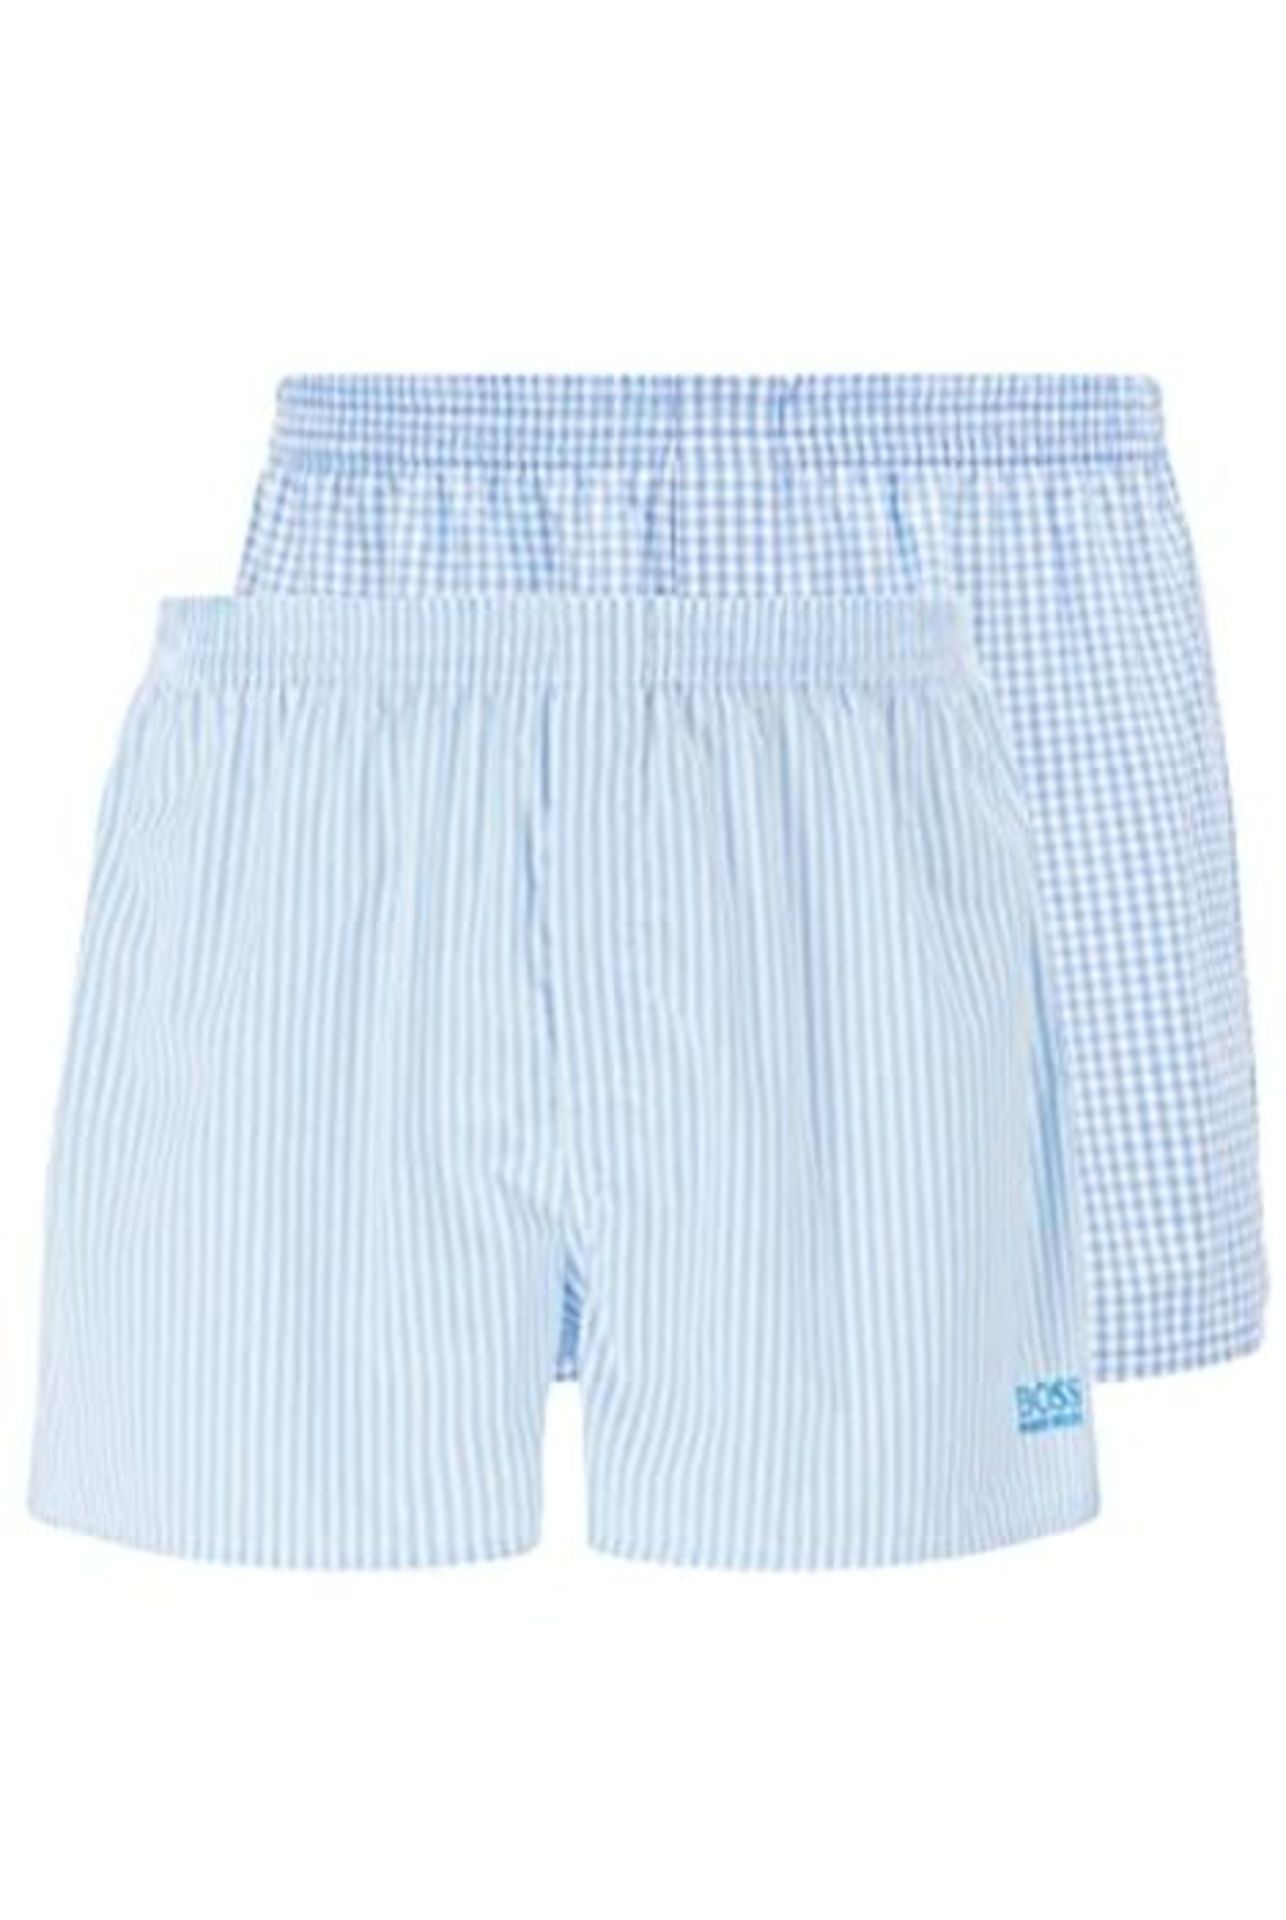 BOSS Mens NOS Boxer CW 2P Two-Pack of Pyjama Shorts in Cotton poplin